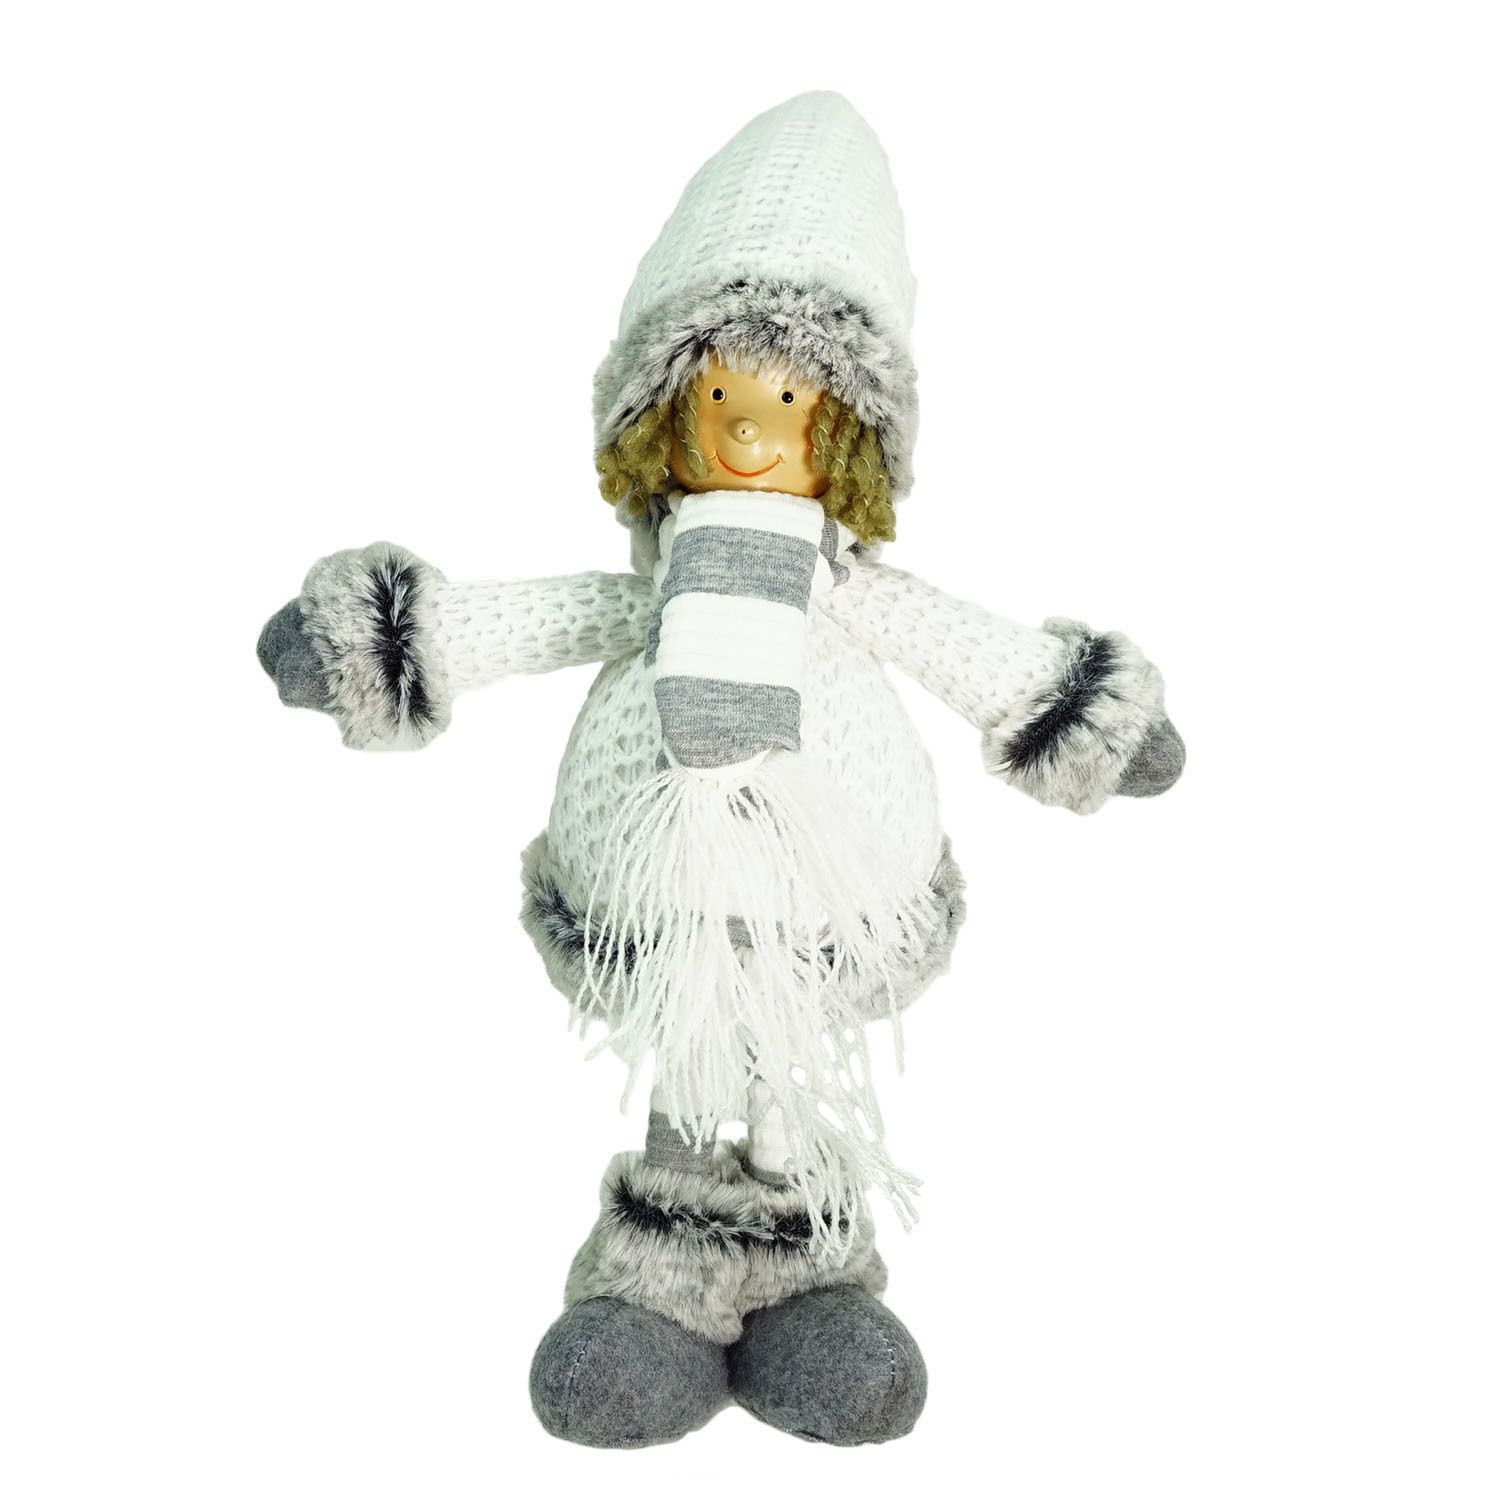 Northlight 18-Inch Plush White and Blue Sitting Tabletop Yeti